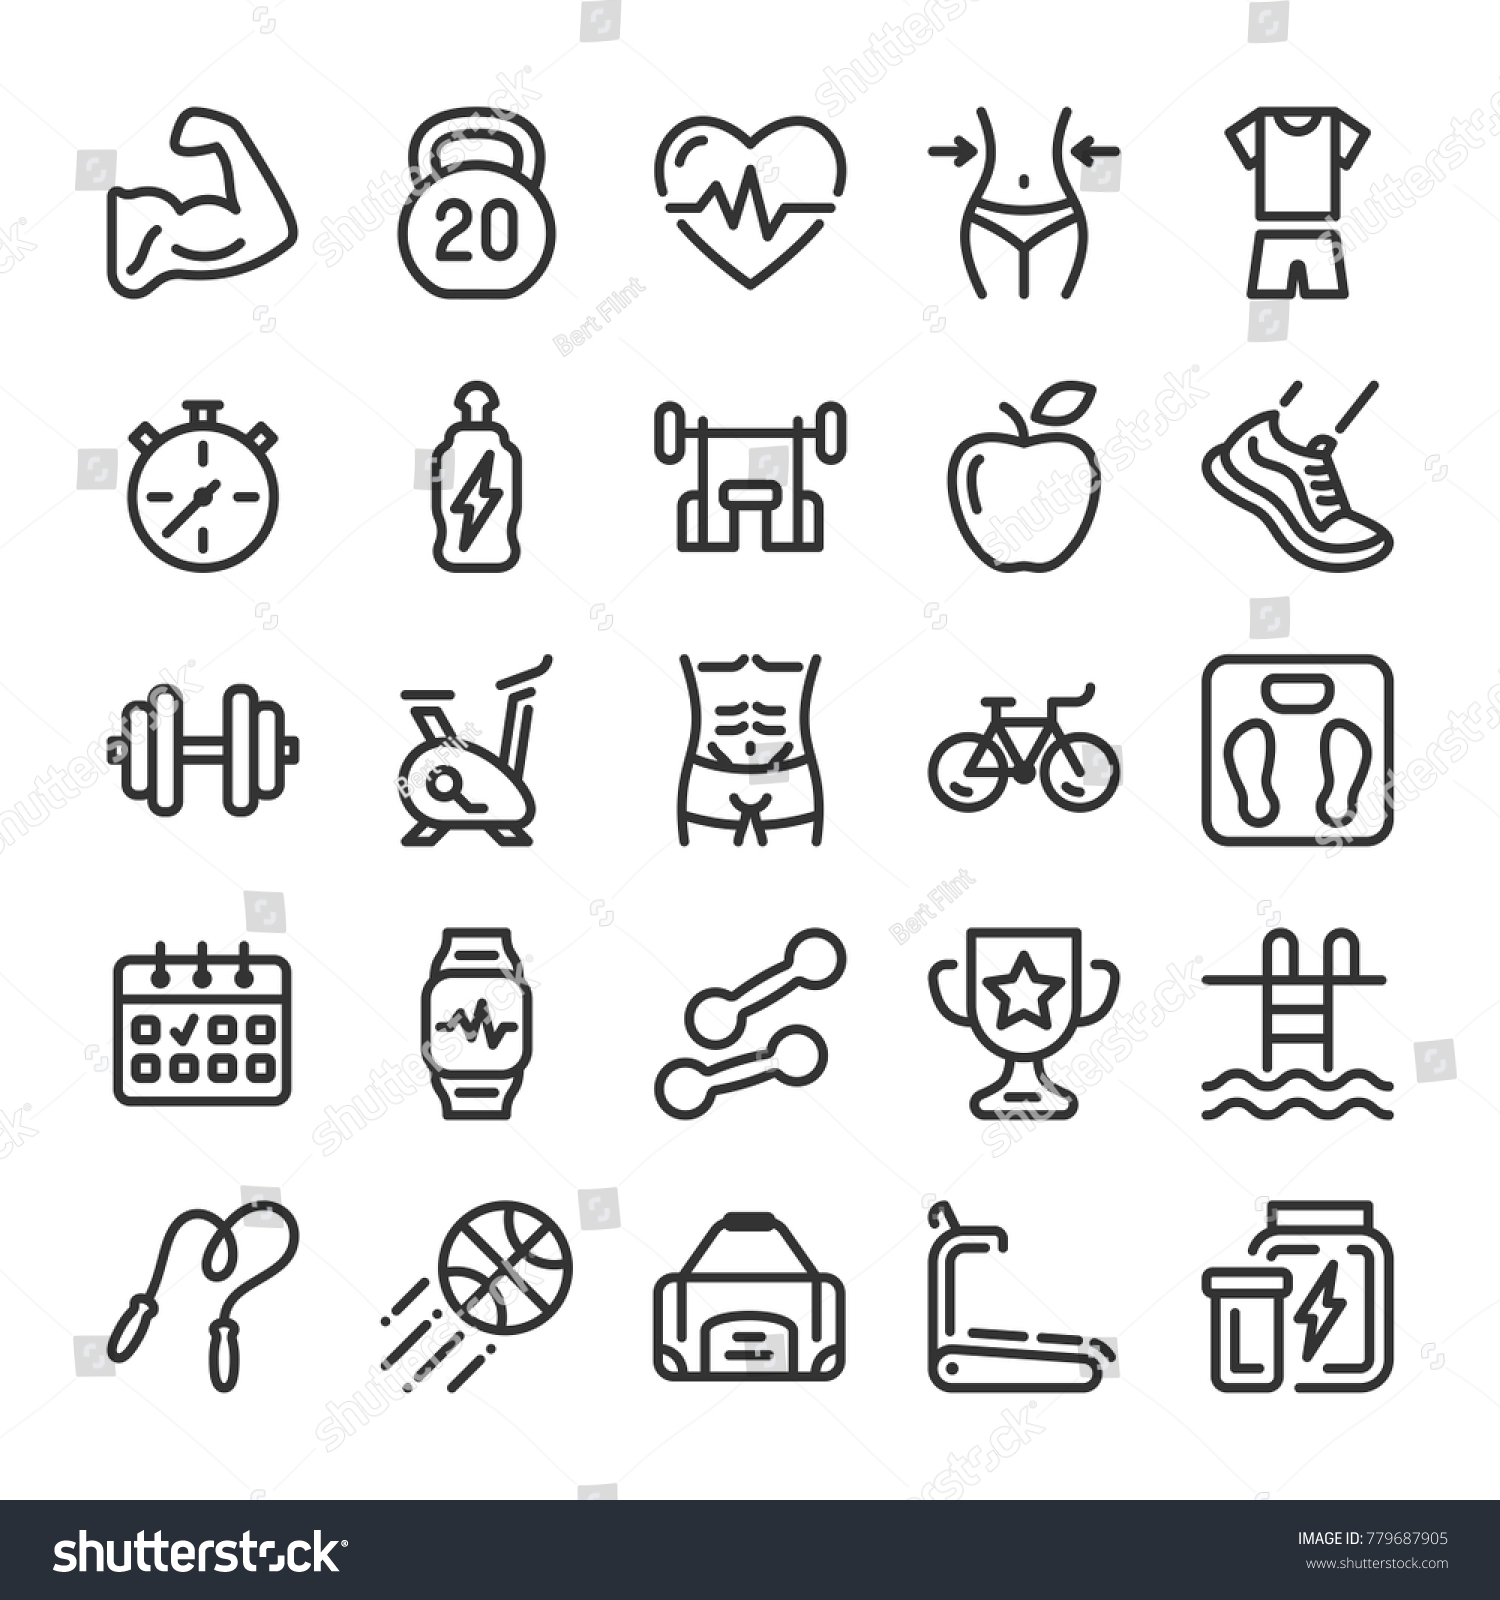 Fitness and sport icons set. Healthy lifestyle symbols. Line style #779687905